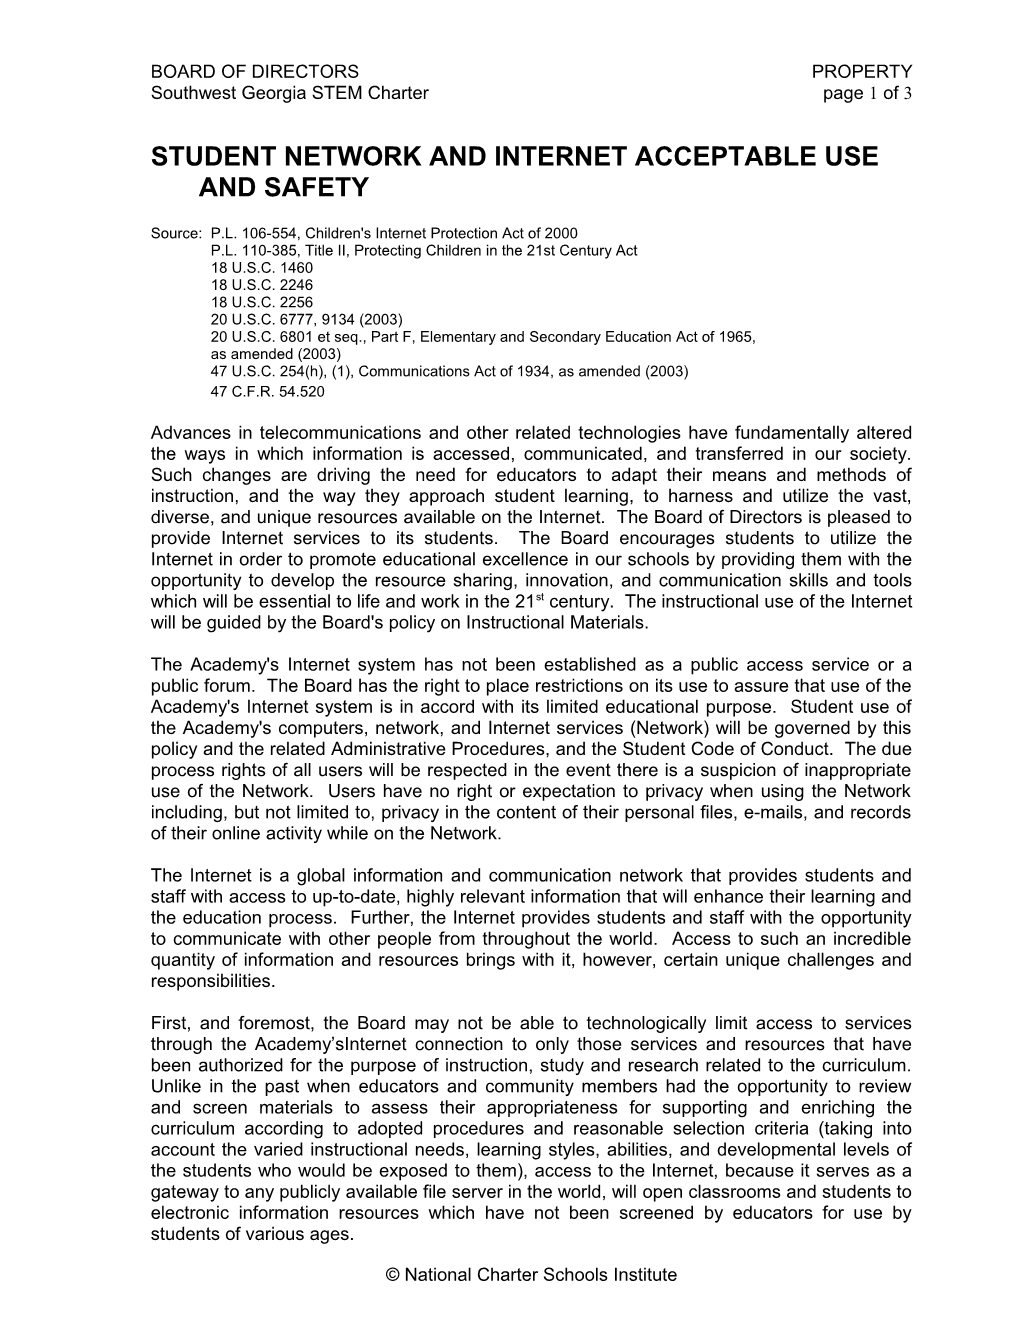 Student Network and Internet Acceptable Use and Safety